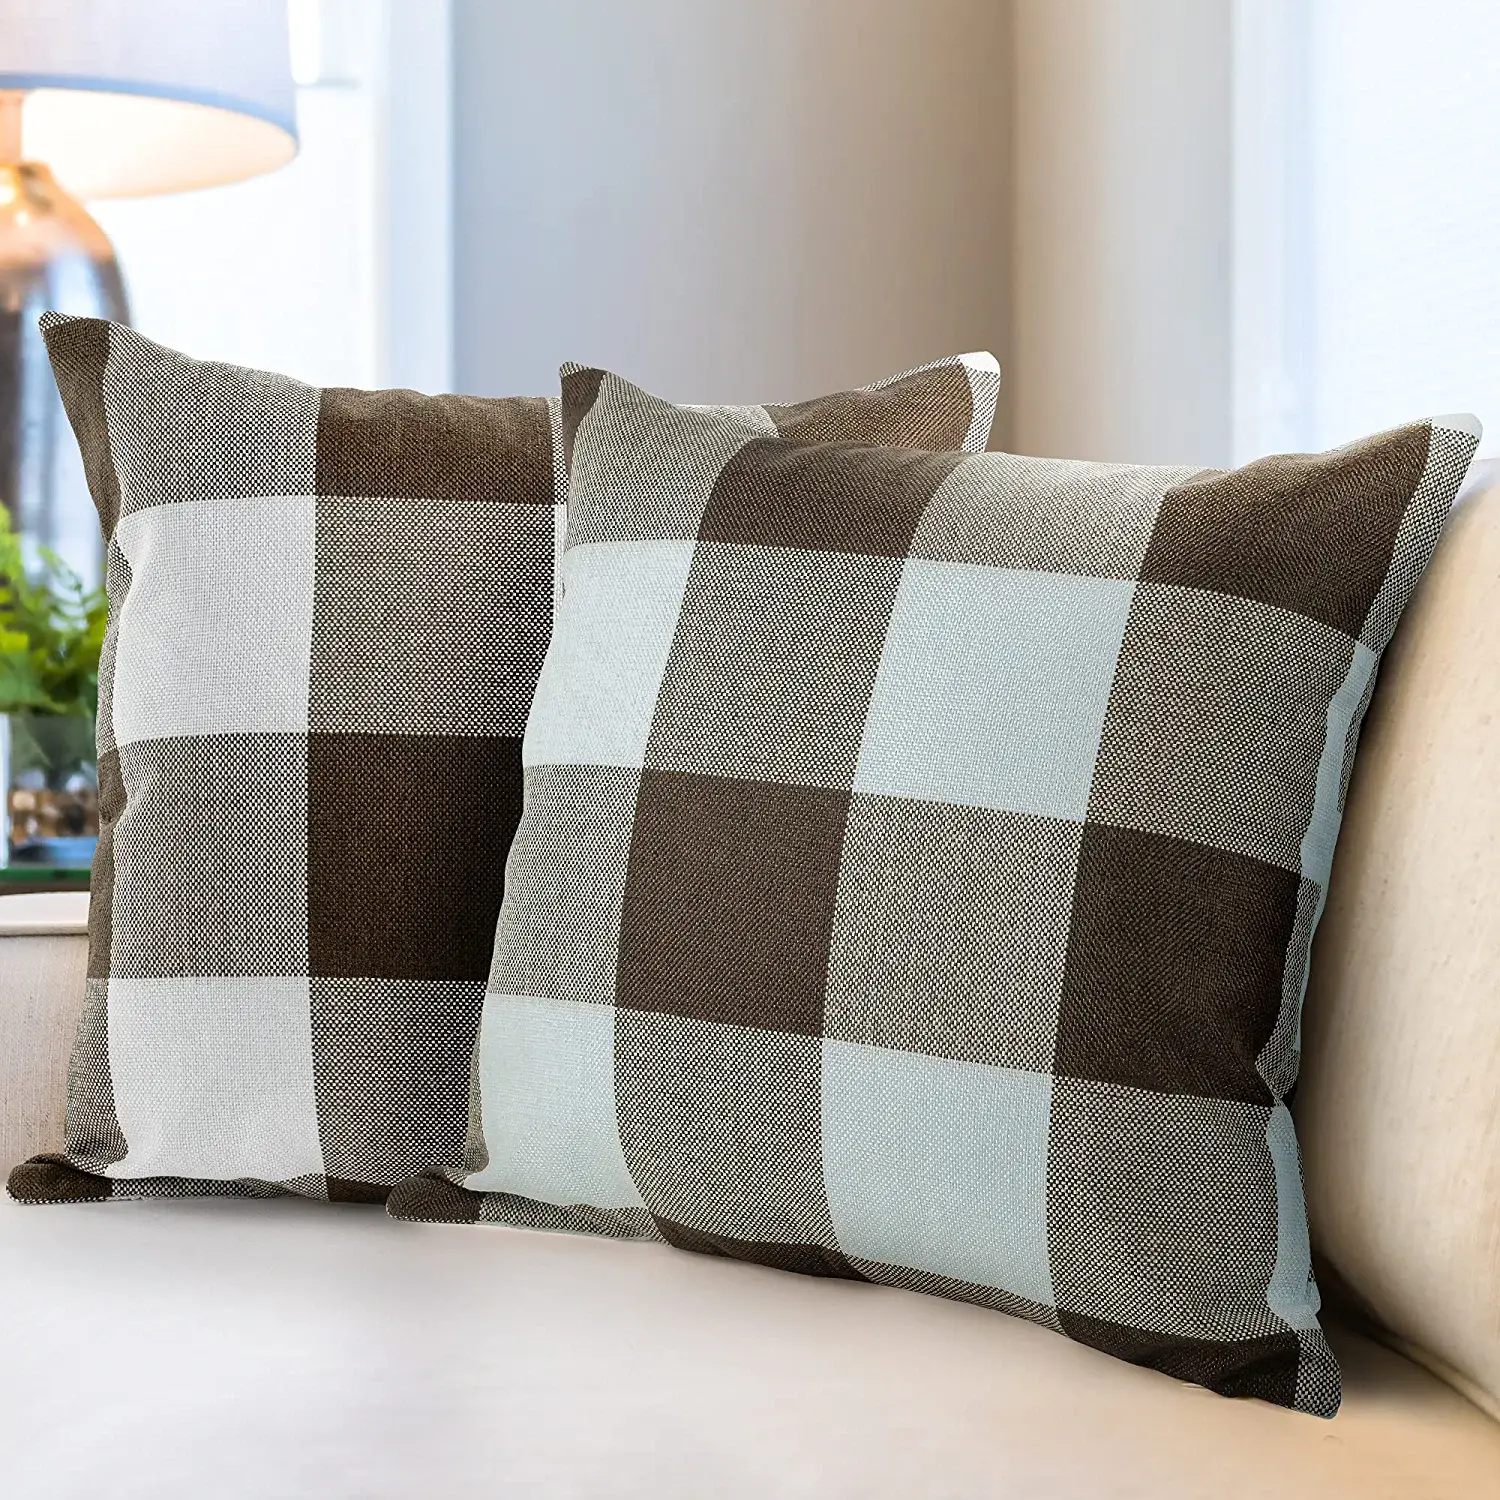 Zulay Home Buffalo Plaid Throw Pillow Covers - Pack Of 2